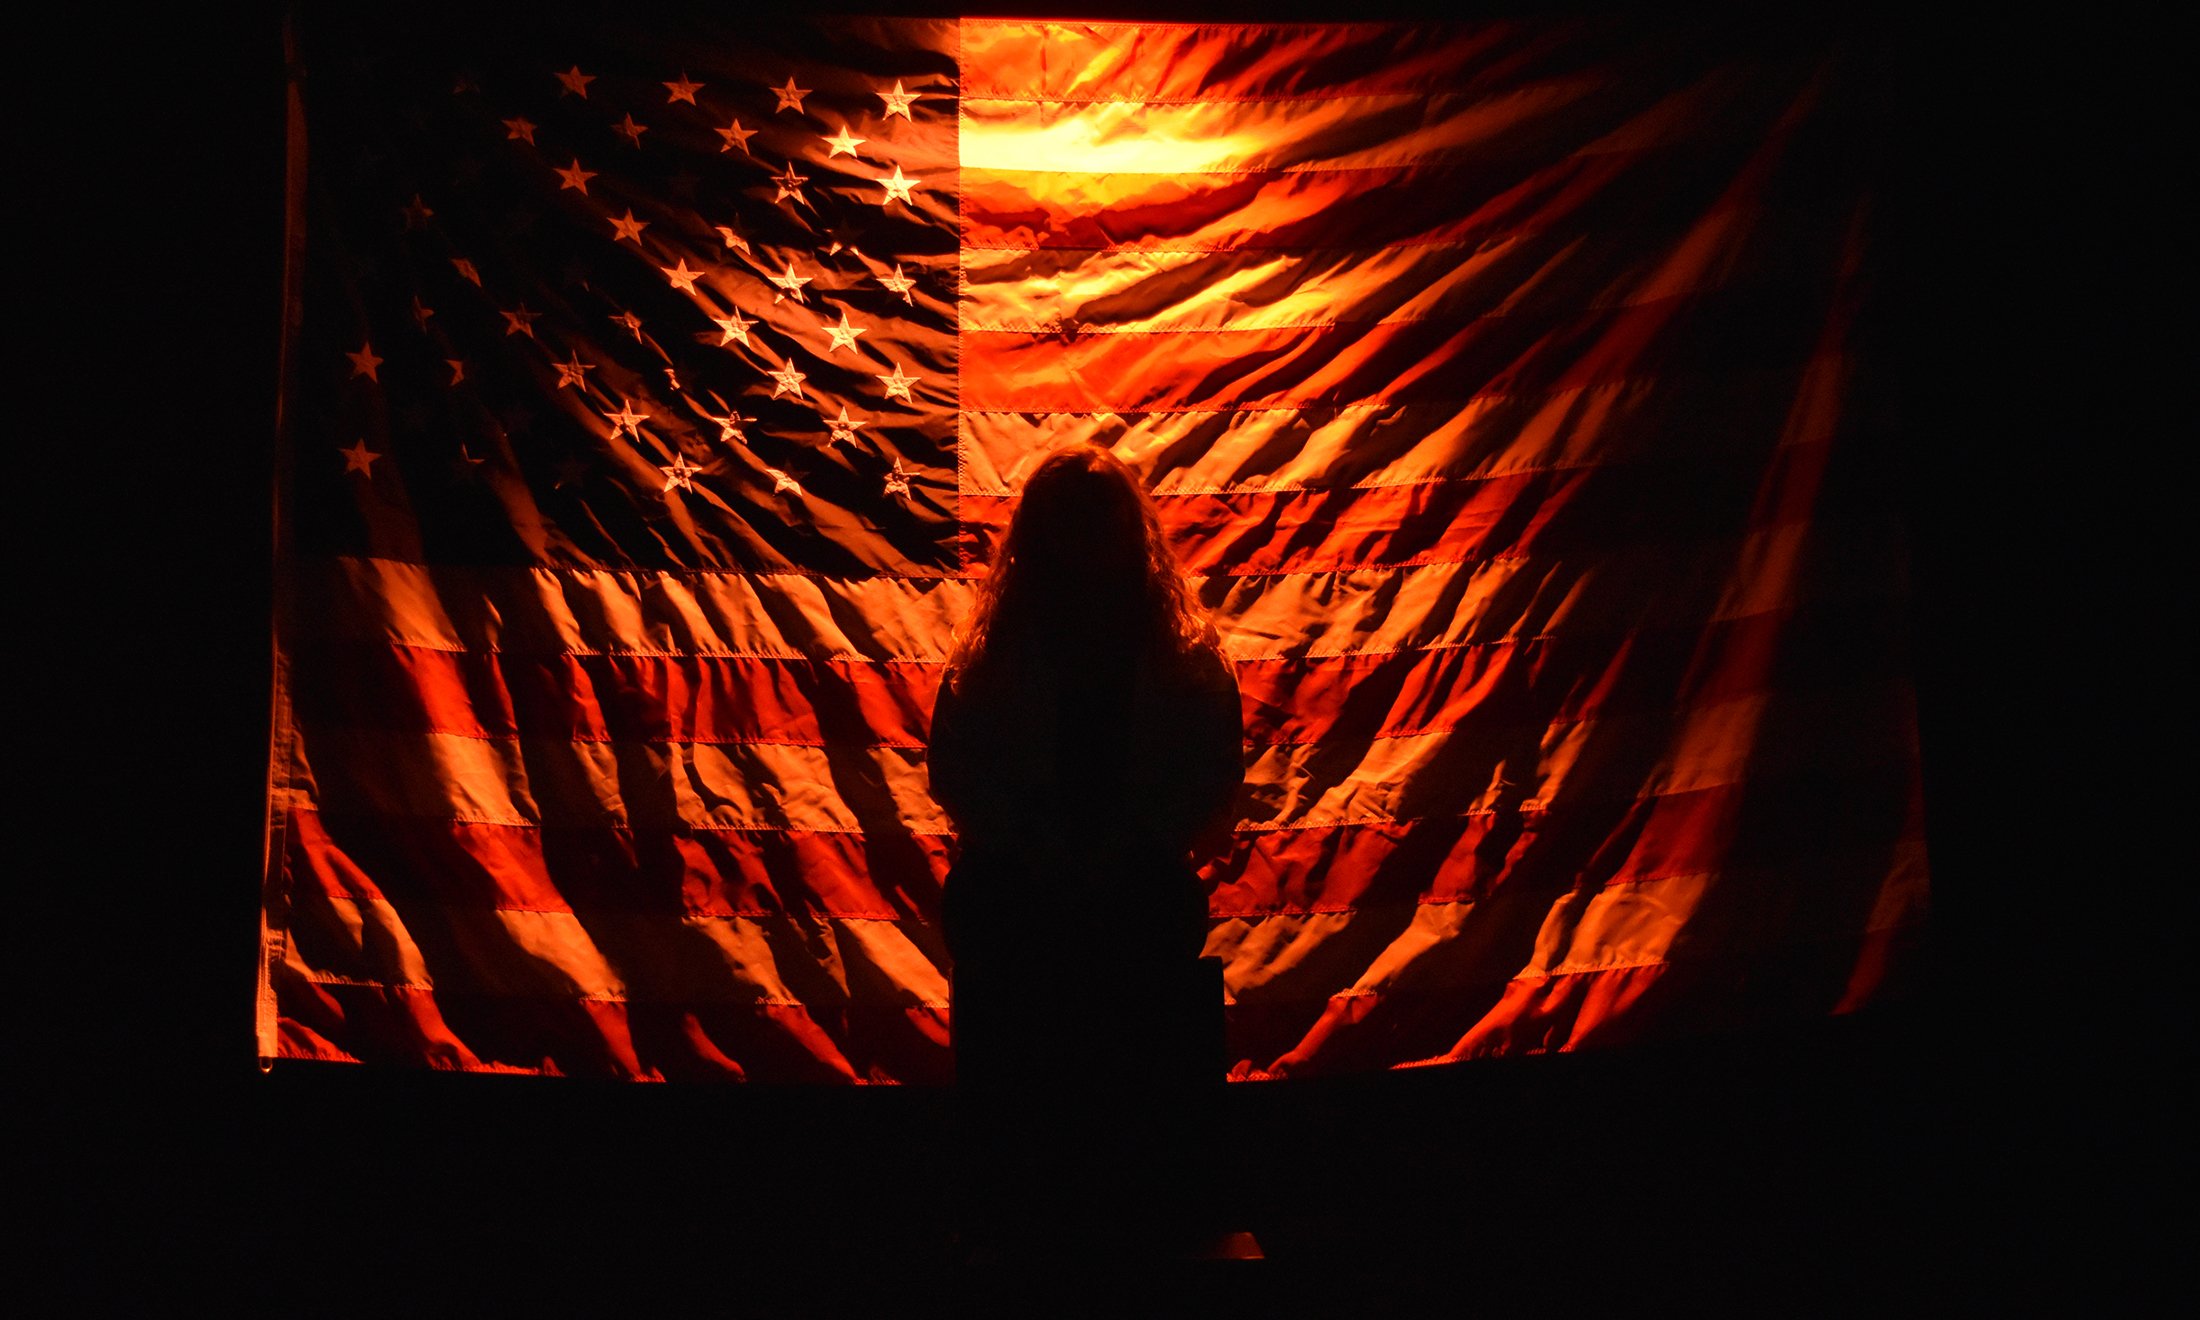 A silhouette of a person in front of the USA flag.